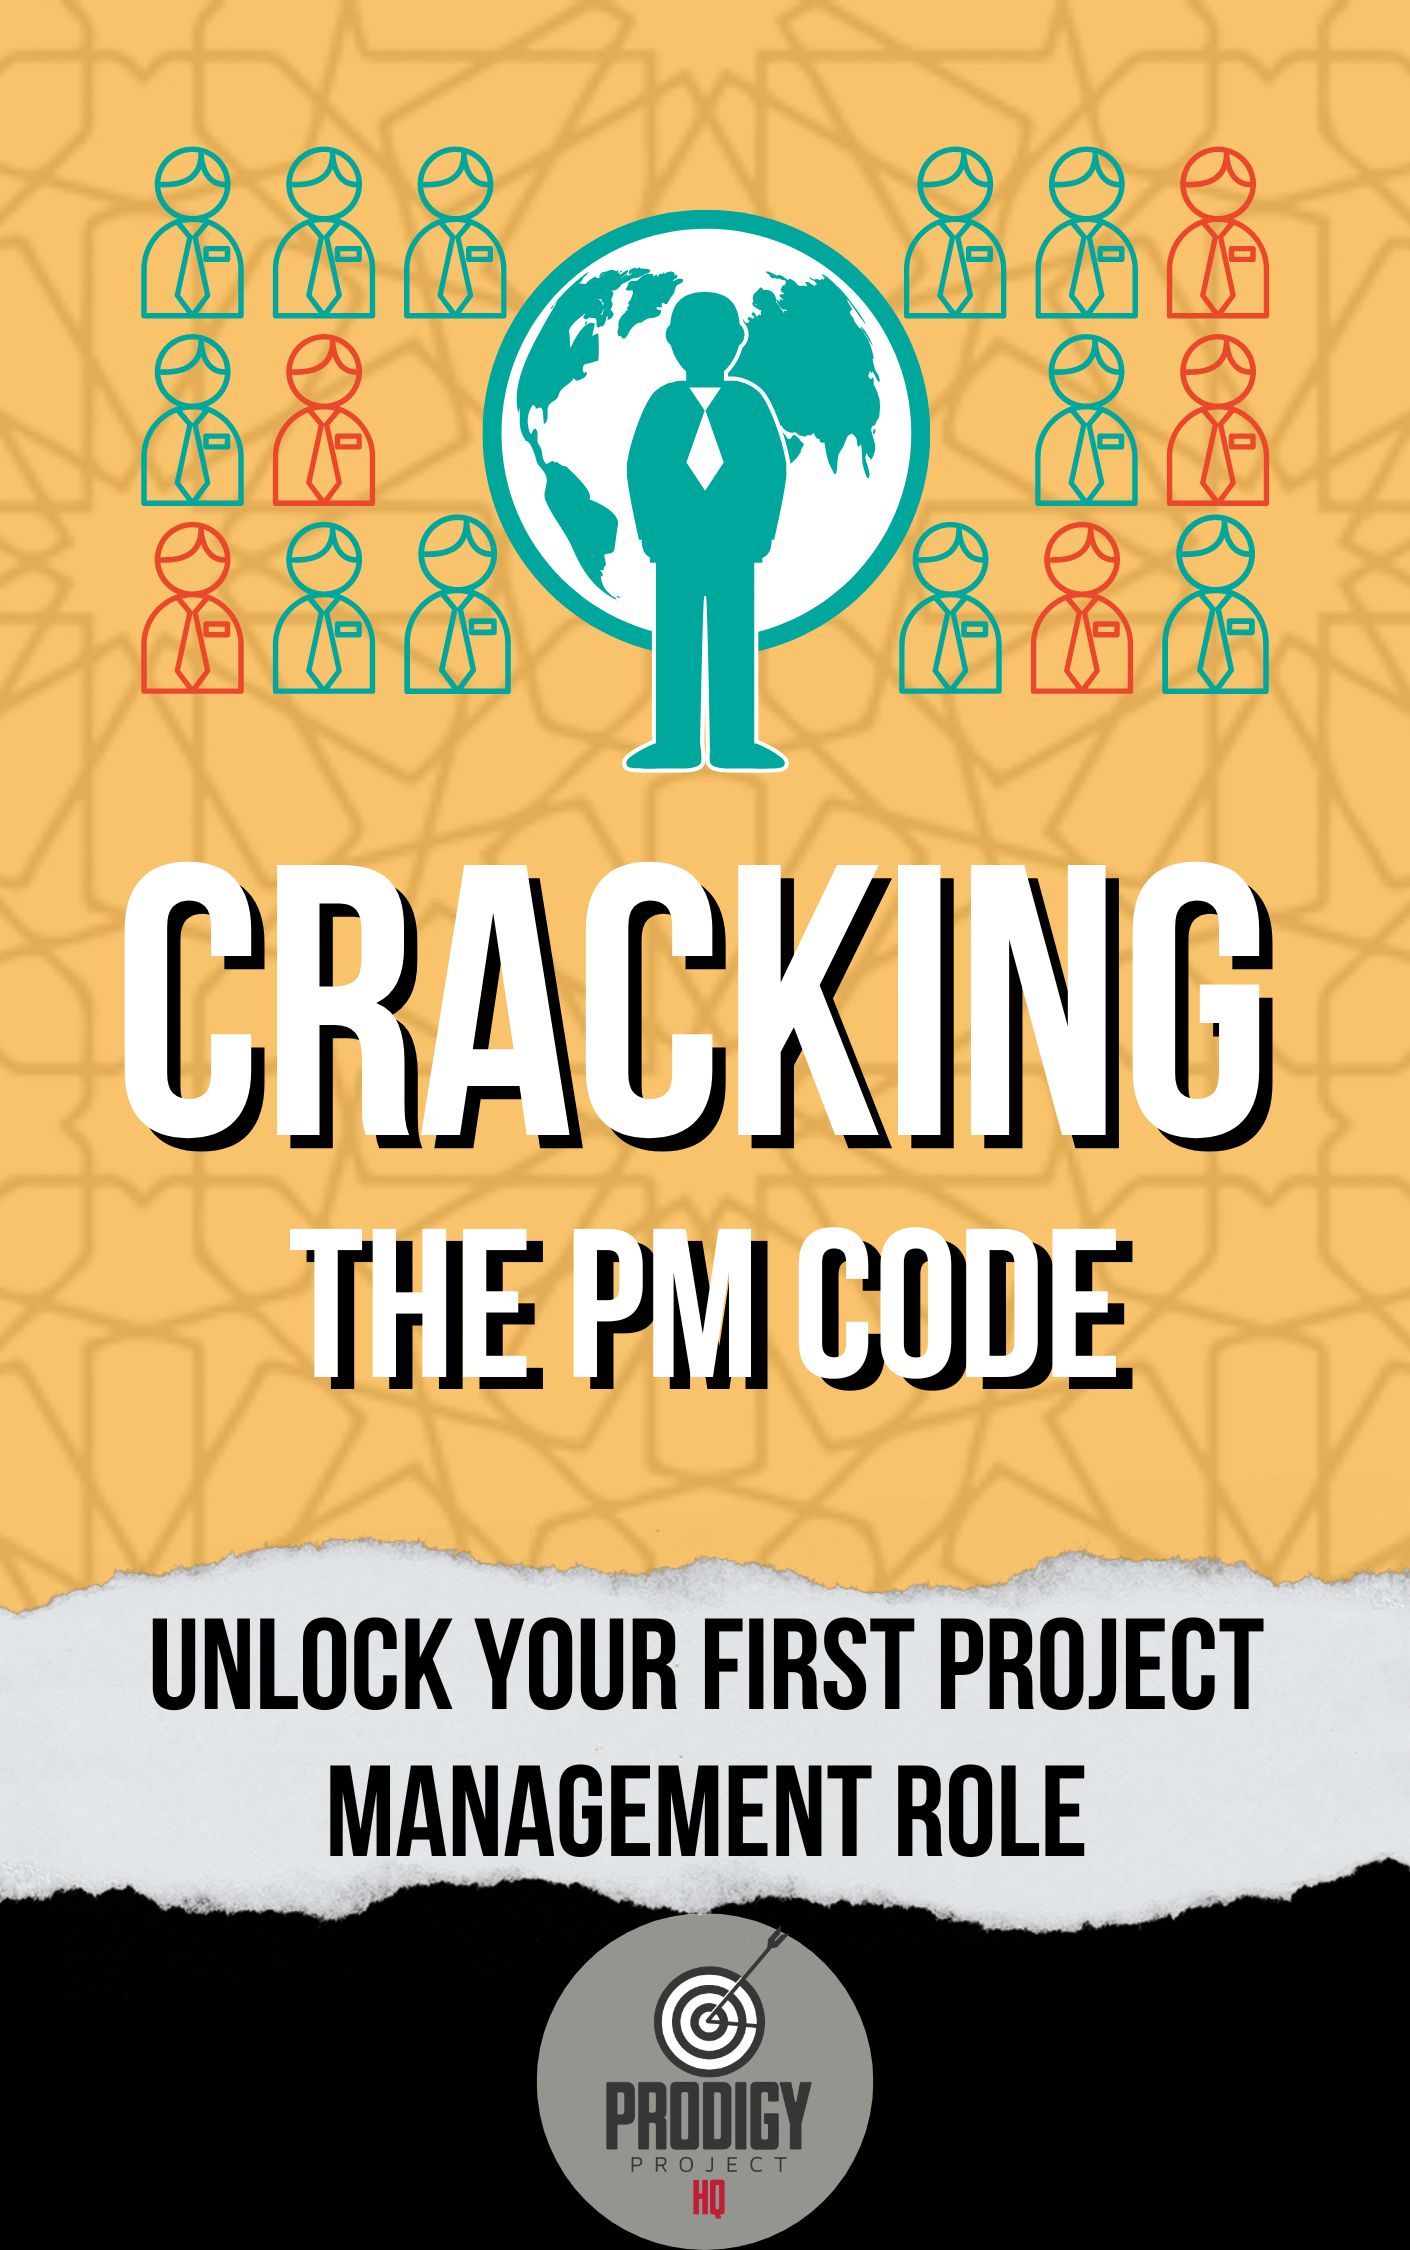 Cracking the PM Code